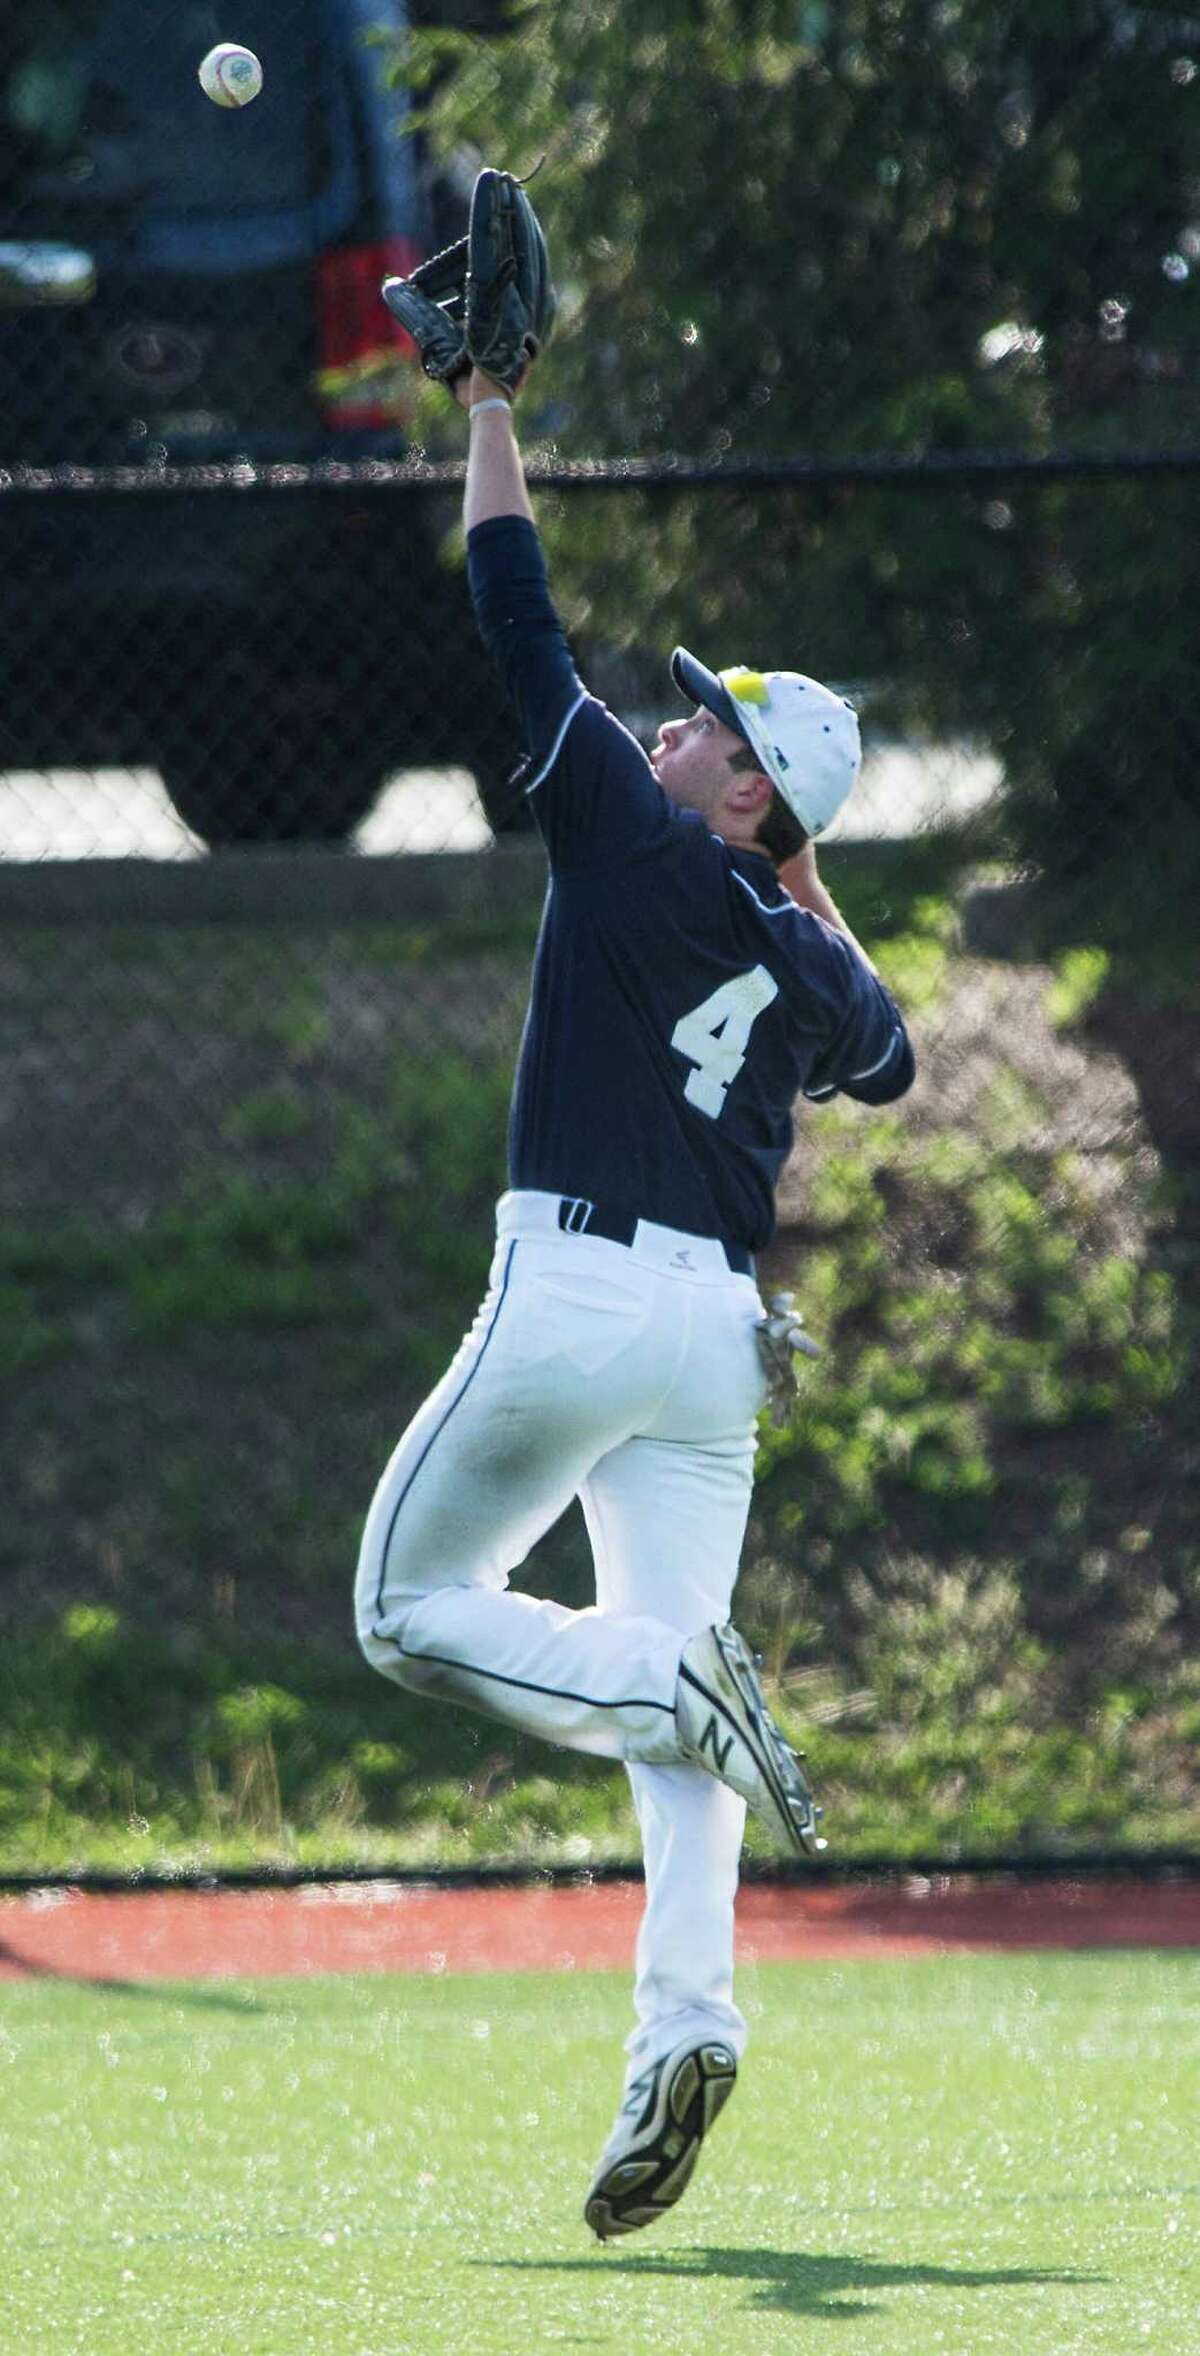 Staples high school outfielder Nathan Panzer catches a flyball during a baseball game against Darien high school played at Darien high school, Darien, CT on Friday, May, 15th, 2015.